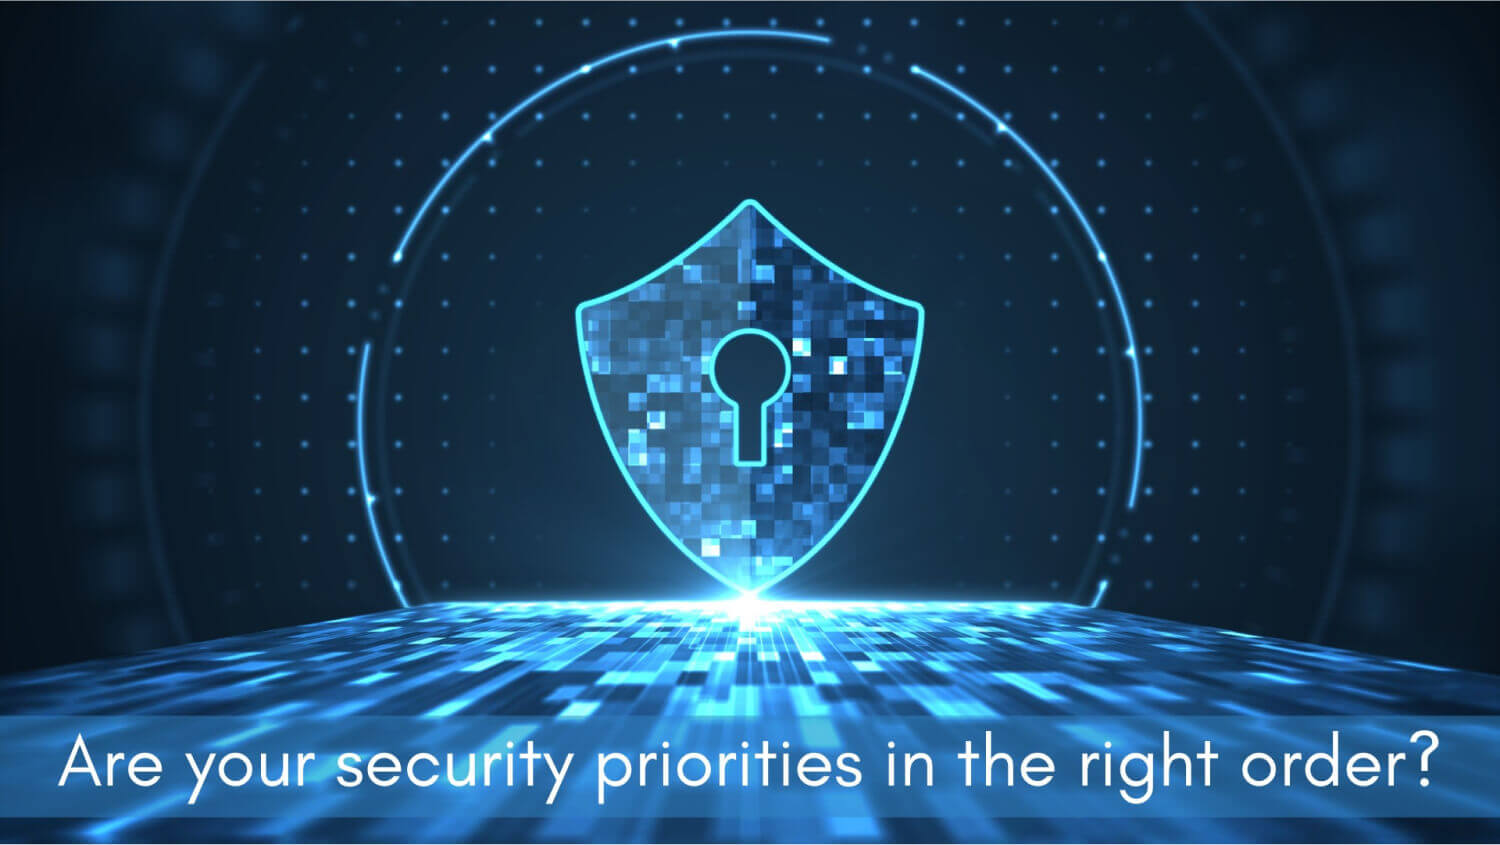 Are your security priorities in the right order?